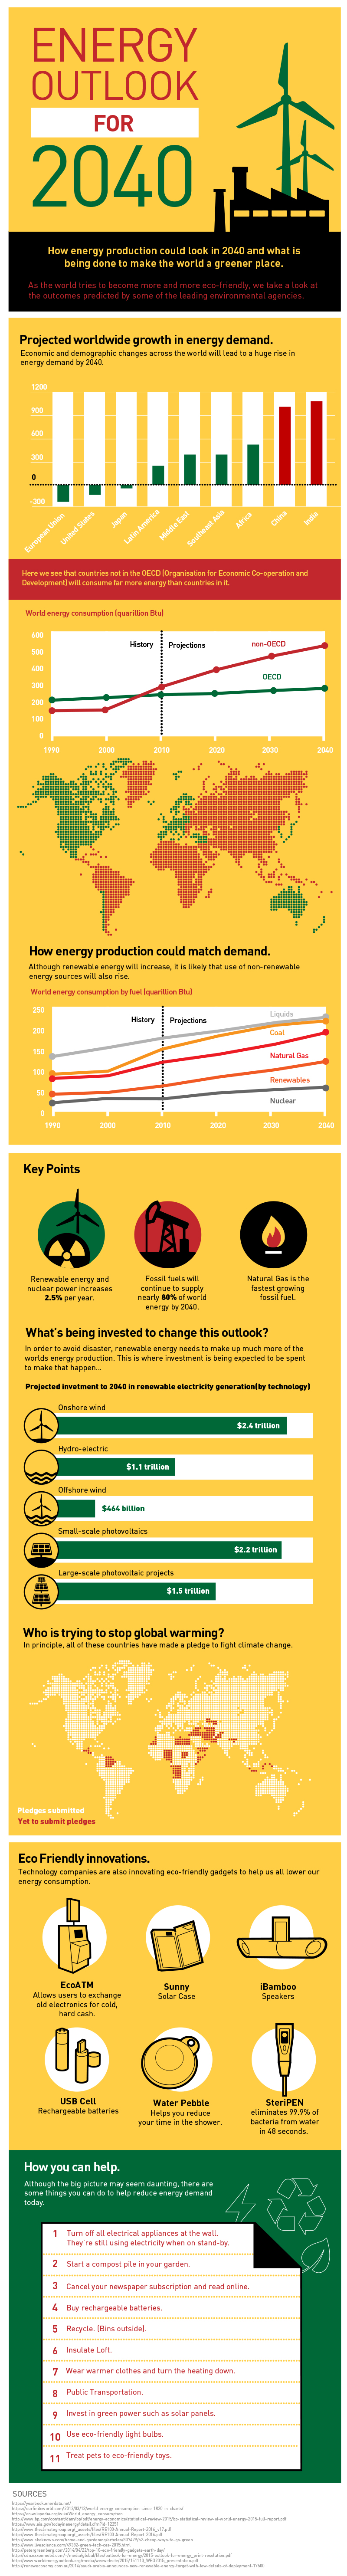 Energy Outlook for 2040